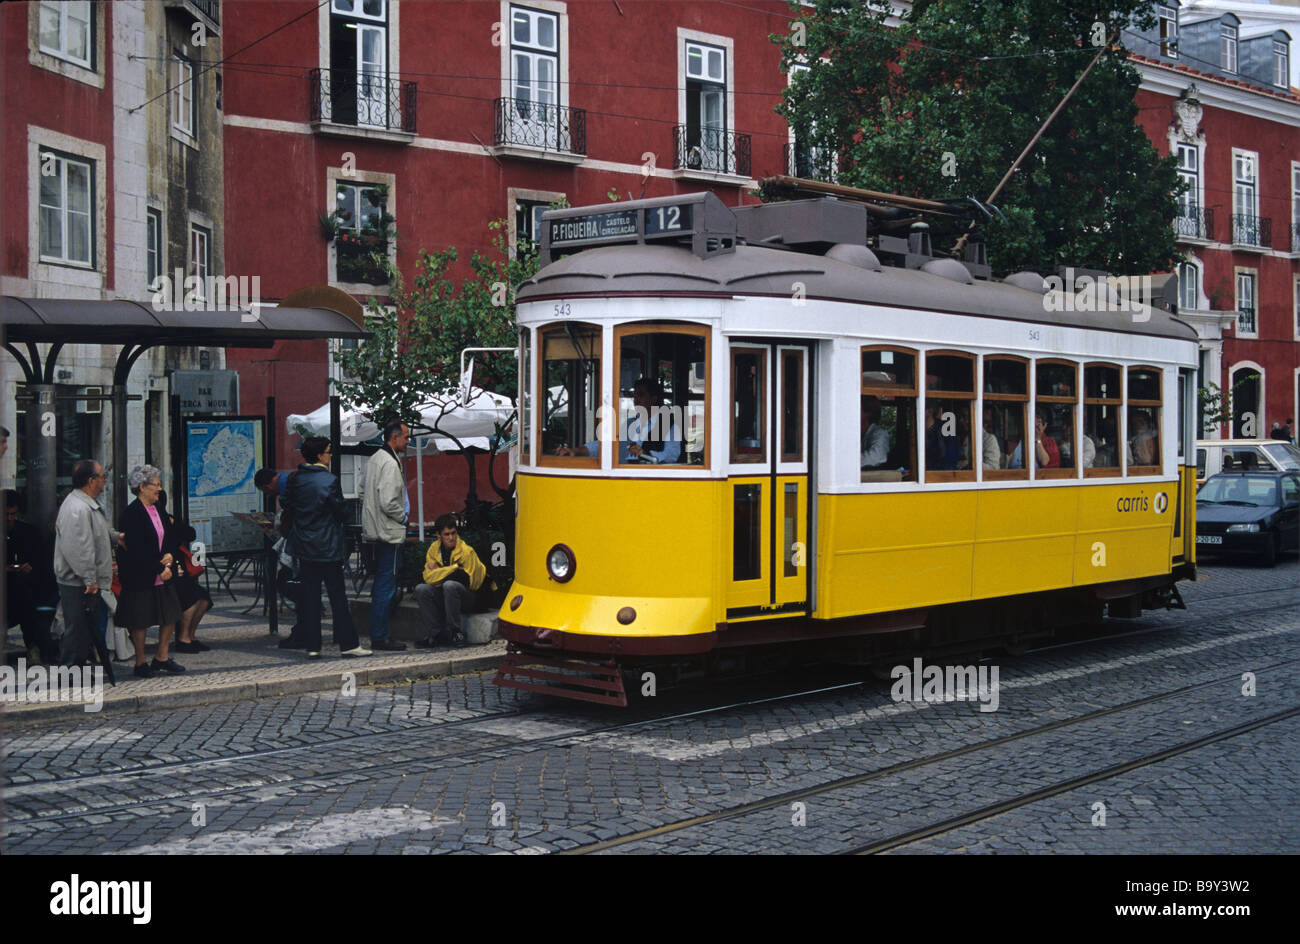 Tram (No 12) in front of the Museum of Decorative Arts, Alfama, Lisbon, Portugal Stock Photo